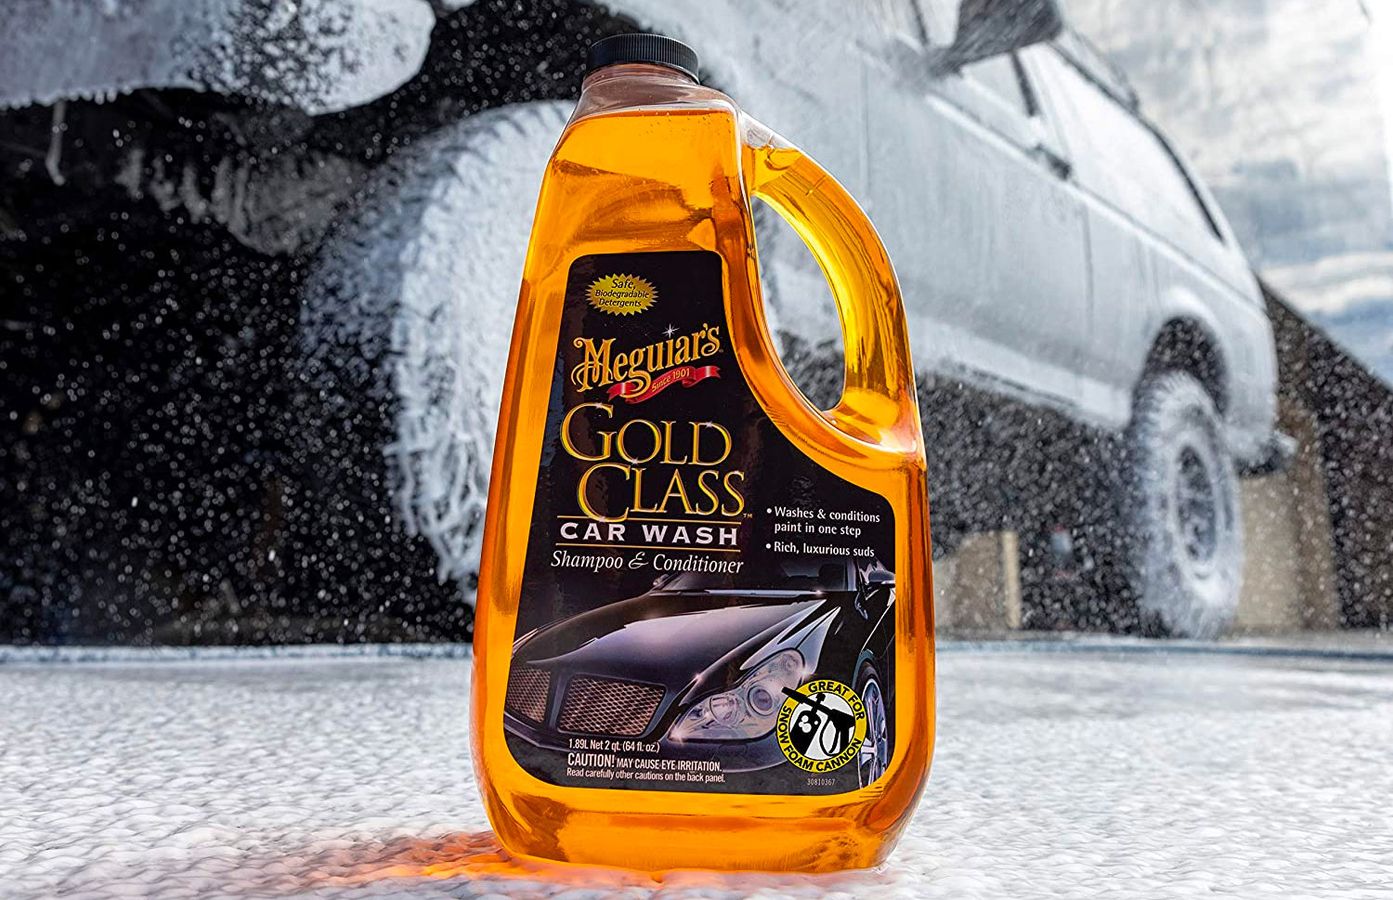 Meguiar's Gold Class Car Wash Shampoo product image of a clear bottle containing a golden shampoo solution.